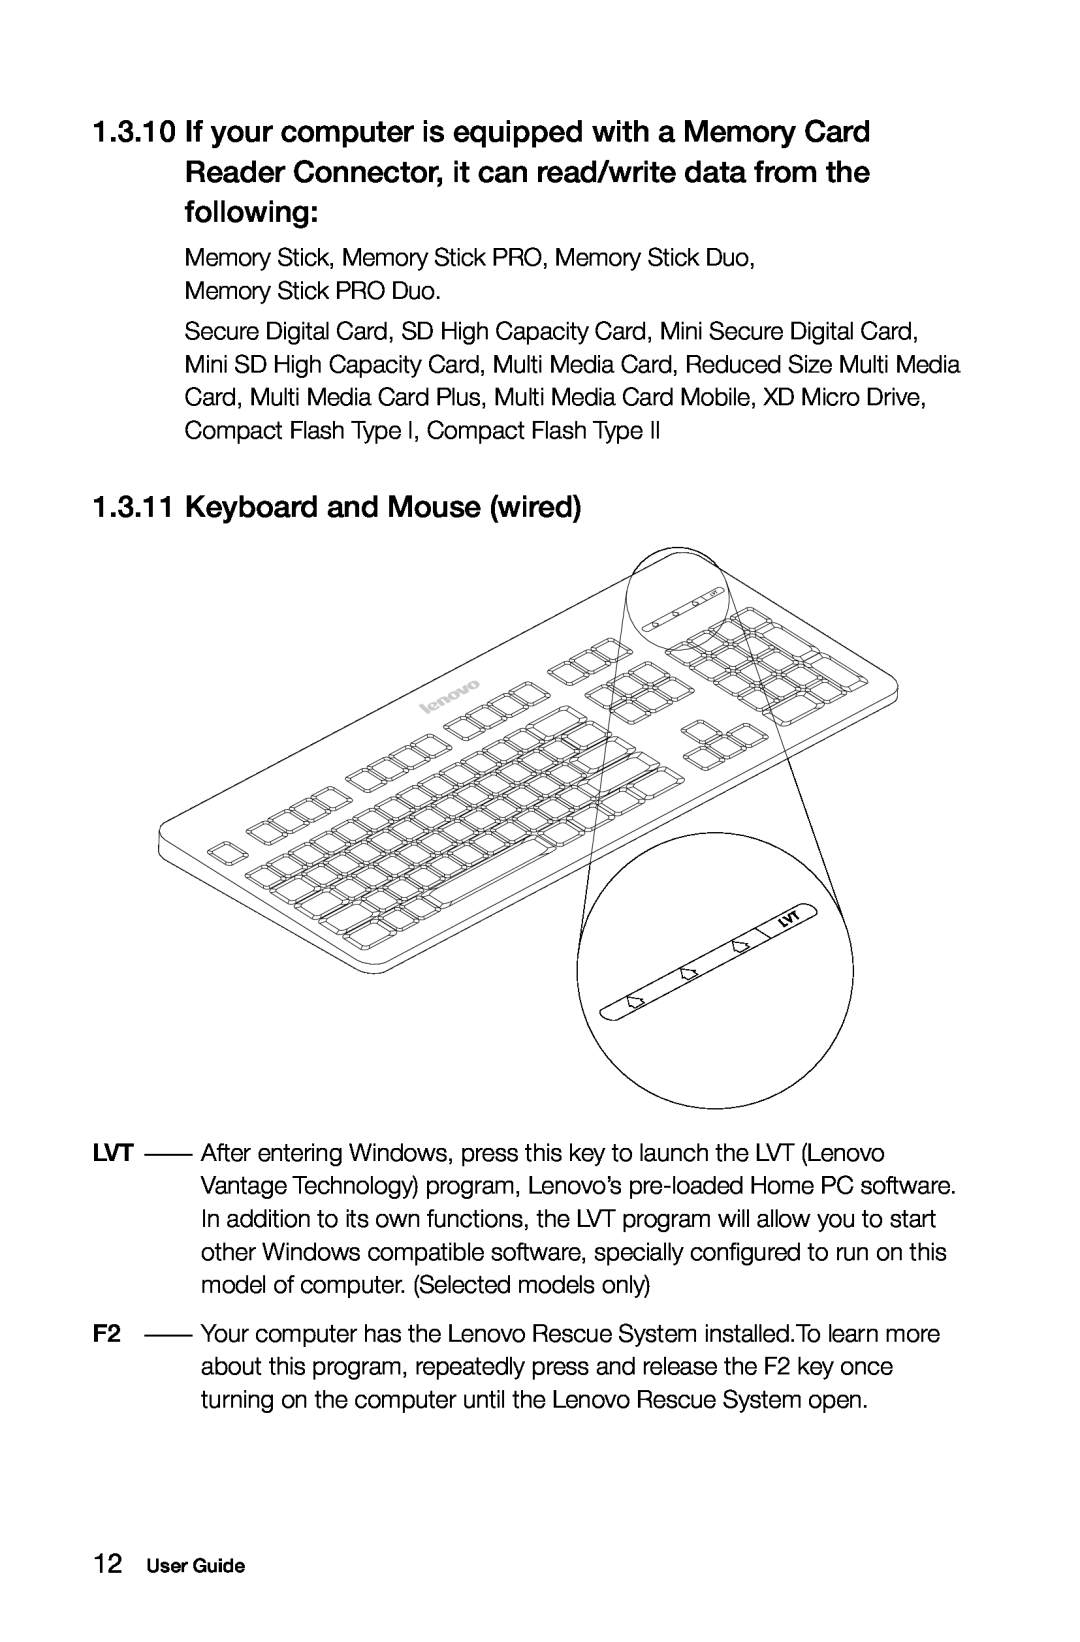 Lenovo 10067/7748, 10073/1169, 10066/7747, 10062/7727 manual Keyboard and Mouse wired, User Guide 